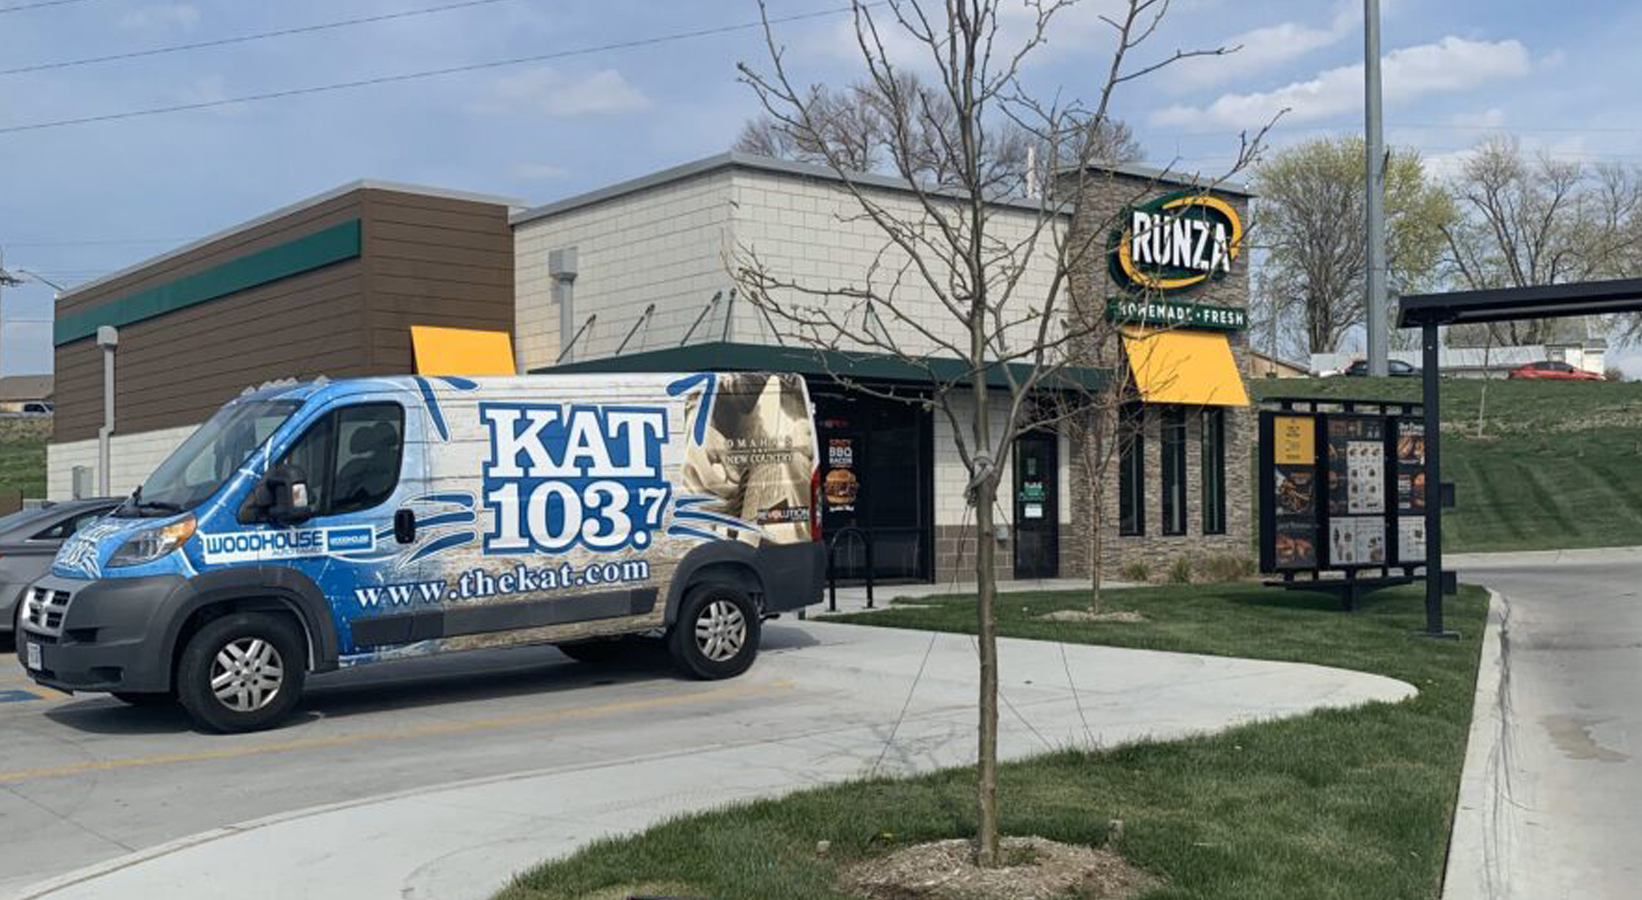 Photo of Runza Restaurant location and KAT 103.7 van outside during Feeds the Need